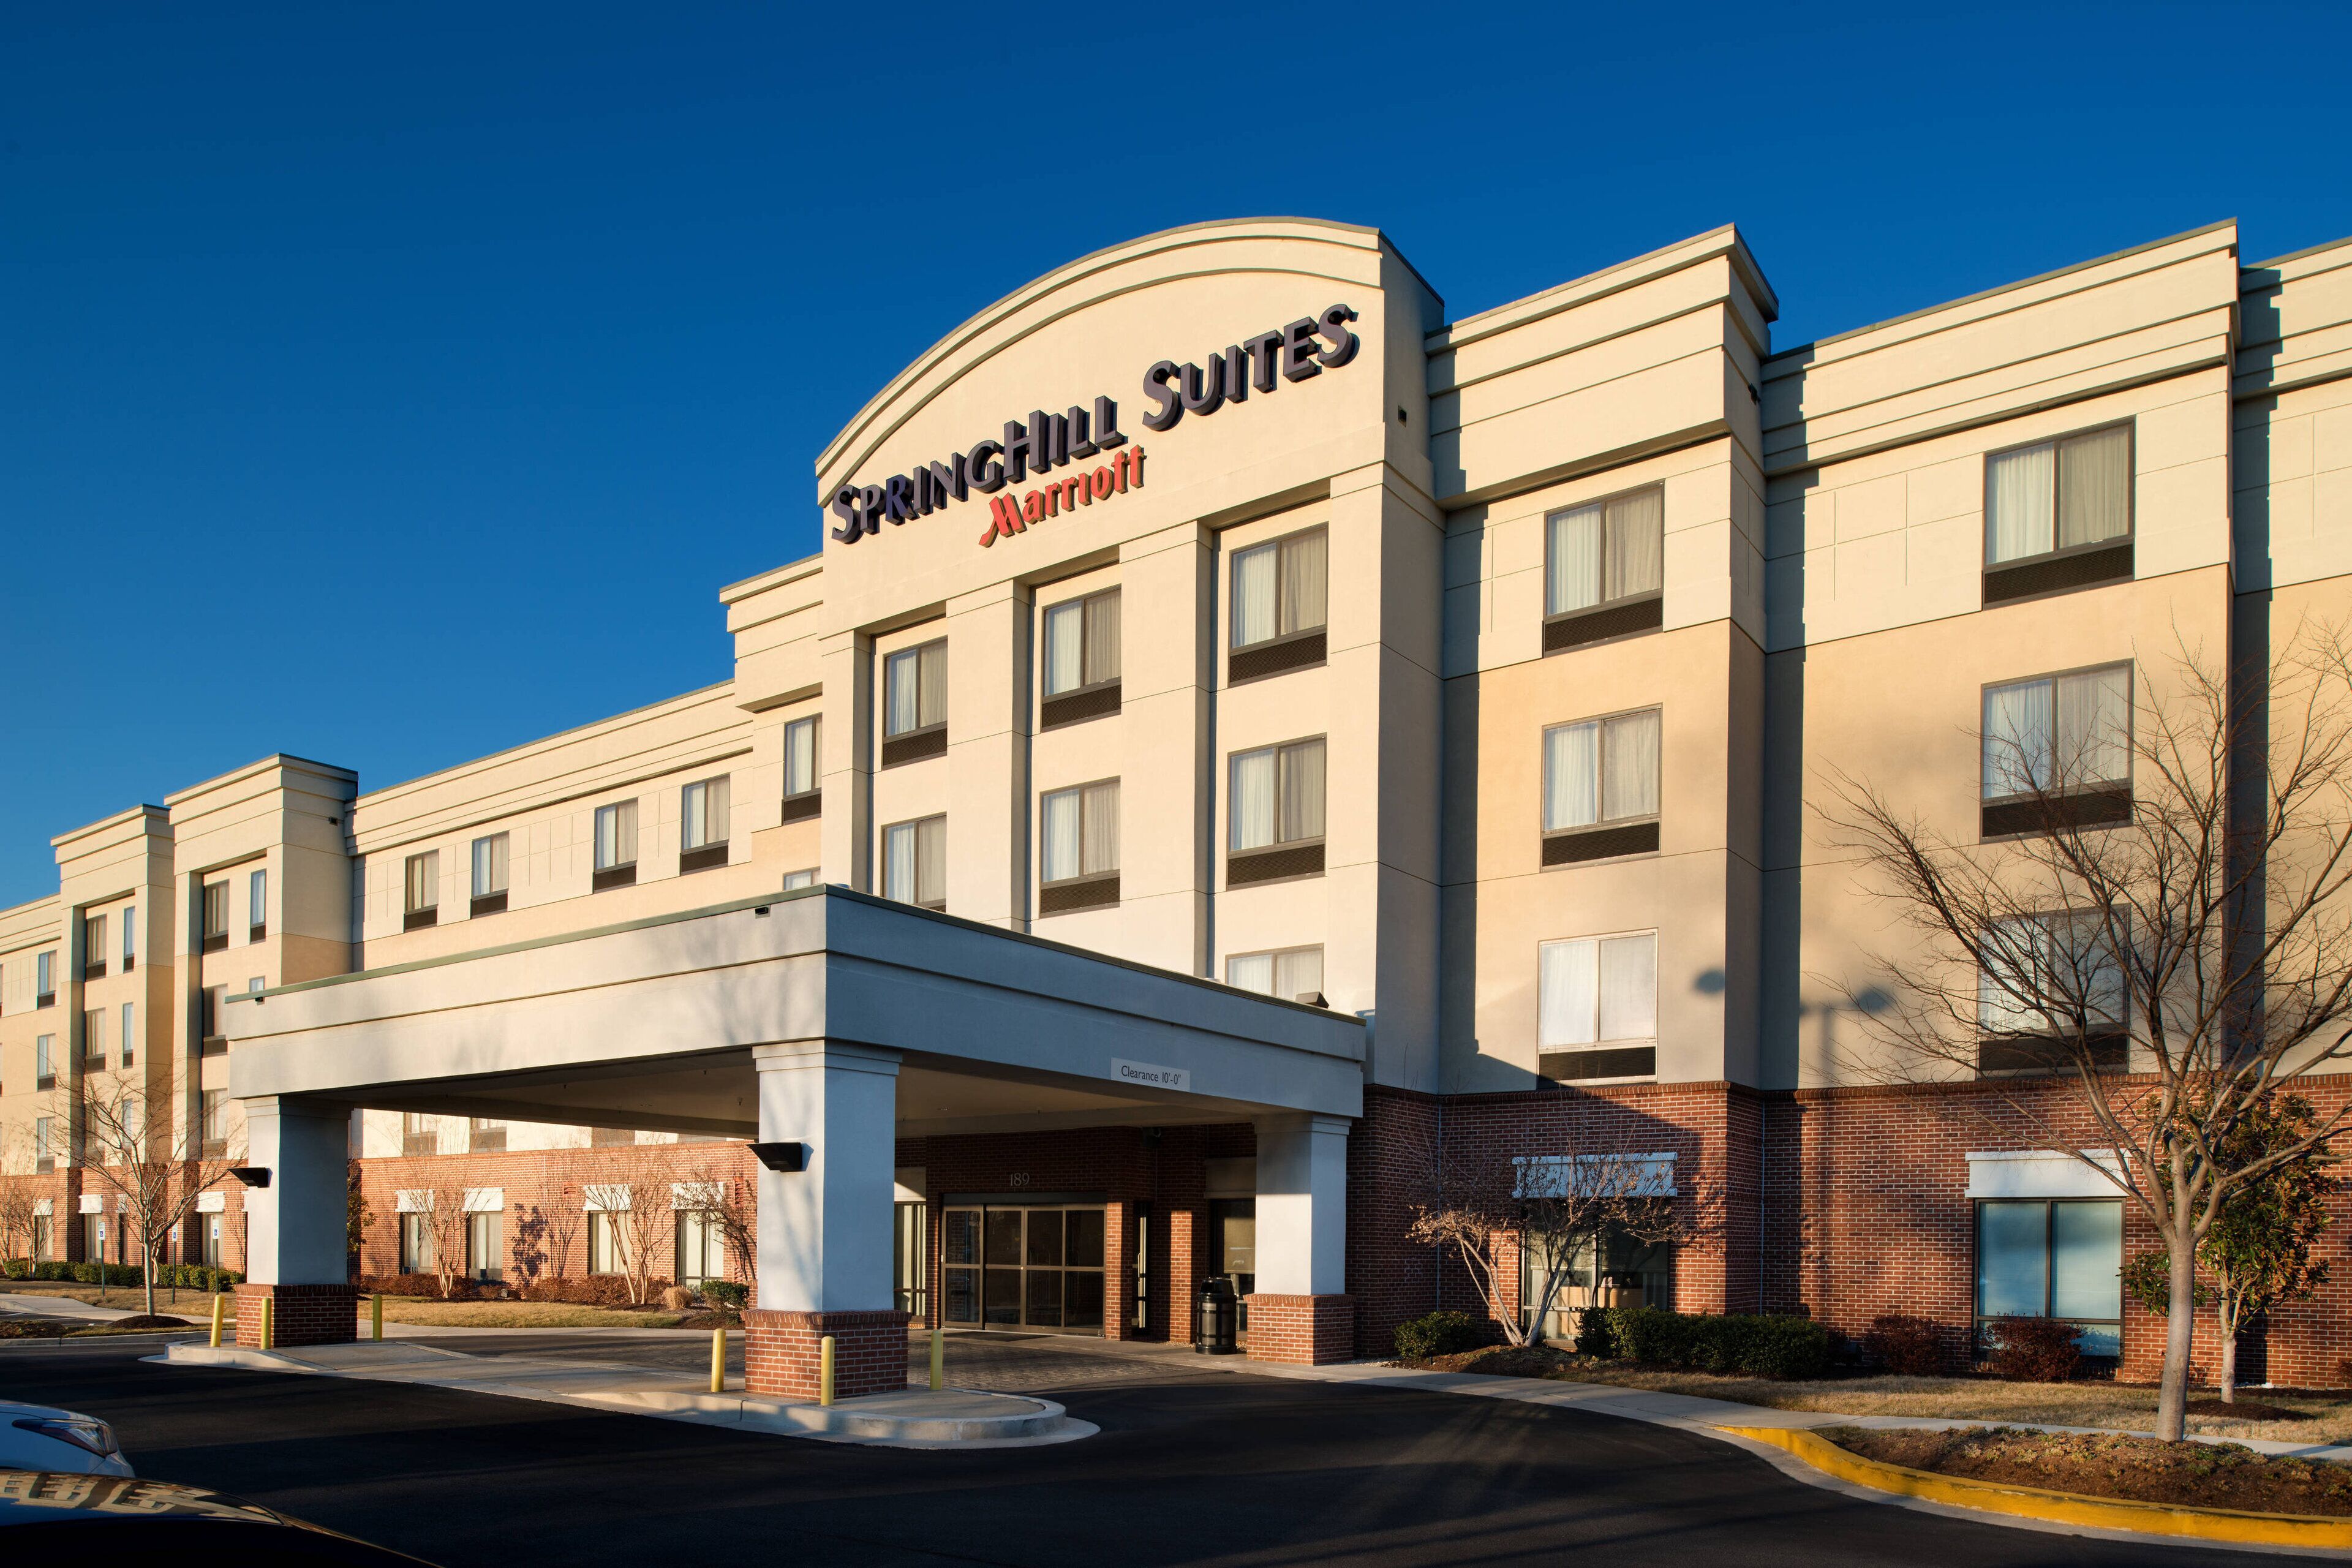 Building view of SpringHill Suites by Marriott Annapolis